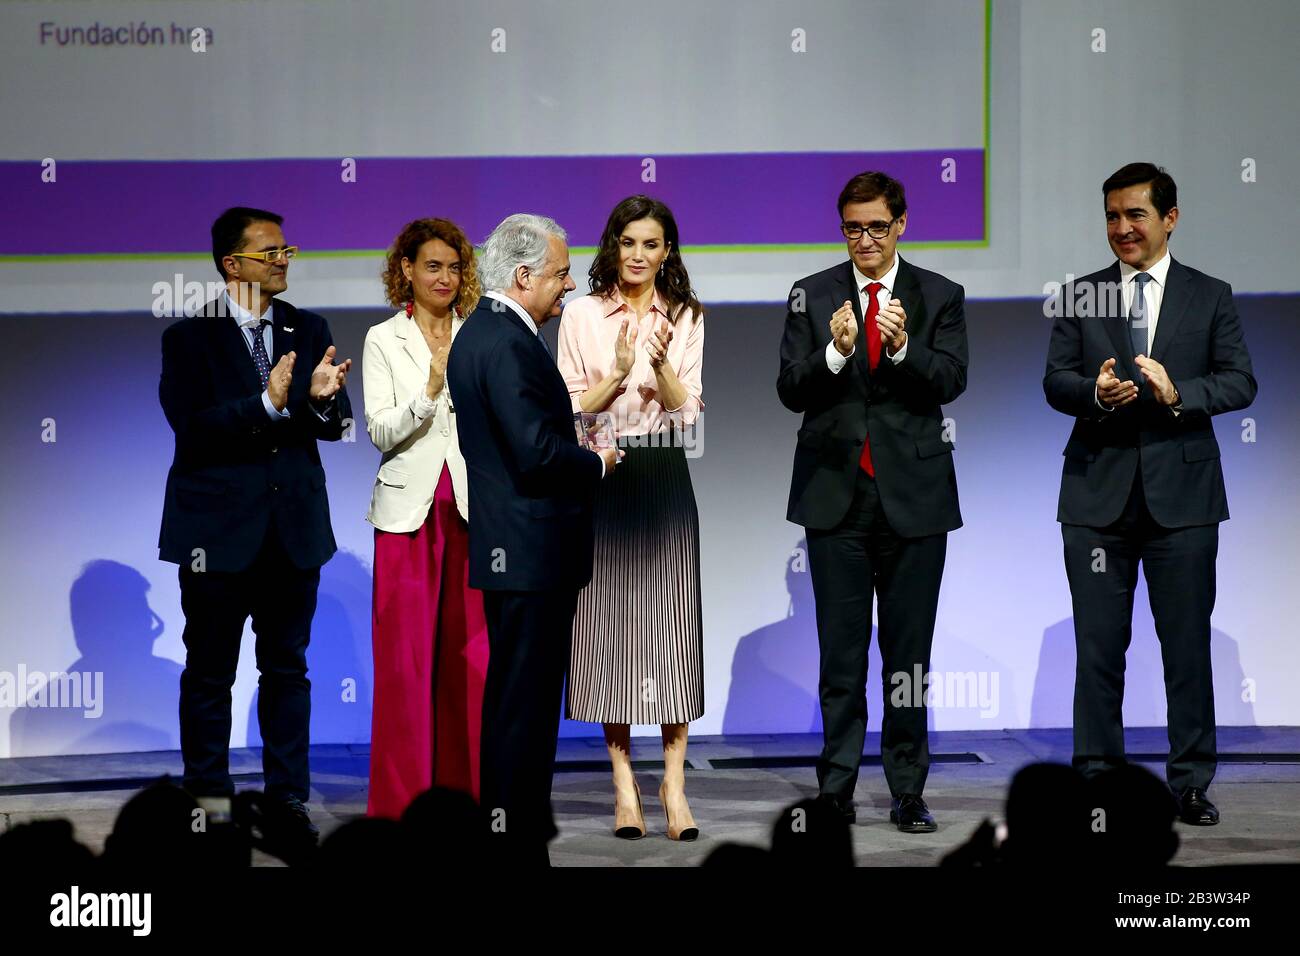 Madris, spain, 05/03/2020.- Ignacio Garralda, president of the Mutua Madrilena Foundation, receives the recognition of the Feder for his support for the therapies of children with rare diseases.Queen of Spain Letizia (C), together with the Minister of Health, Salvador Illa (2R), presides over the central act of World Rare Disease Day, which is celebrated with the motto 'Grow with you, our hope'. In the city of BBVA in Madrid with the assistance of the president of the Congress, Meritxell Batet (2L); the Spanish Federation of Rare Diseases (Feder in Spanish), Juan Carrión (L), and that of BBVA, Stock Photo